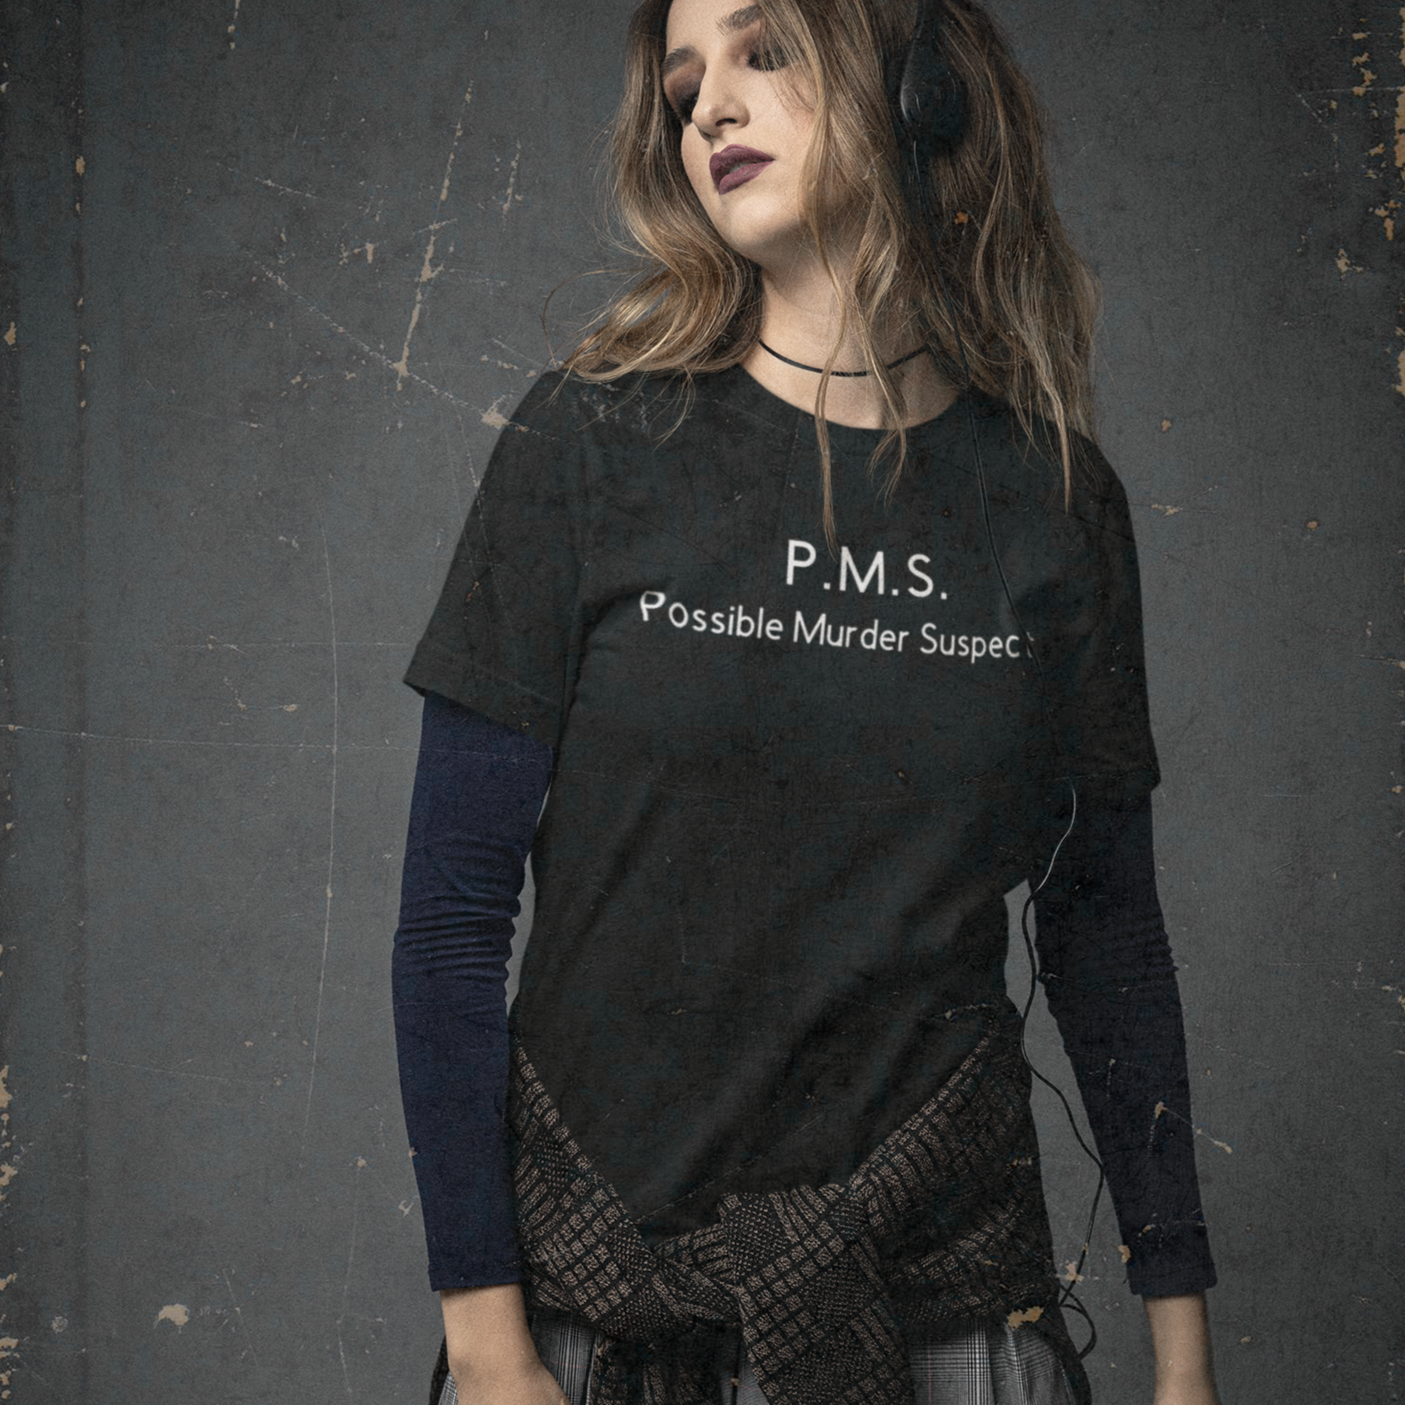 pms-possible-murder-suspect-90s-themed-mockup-of-a-woman-wearing-a-bella-canvas-unisex-tee